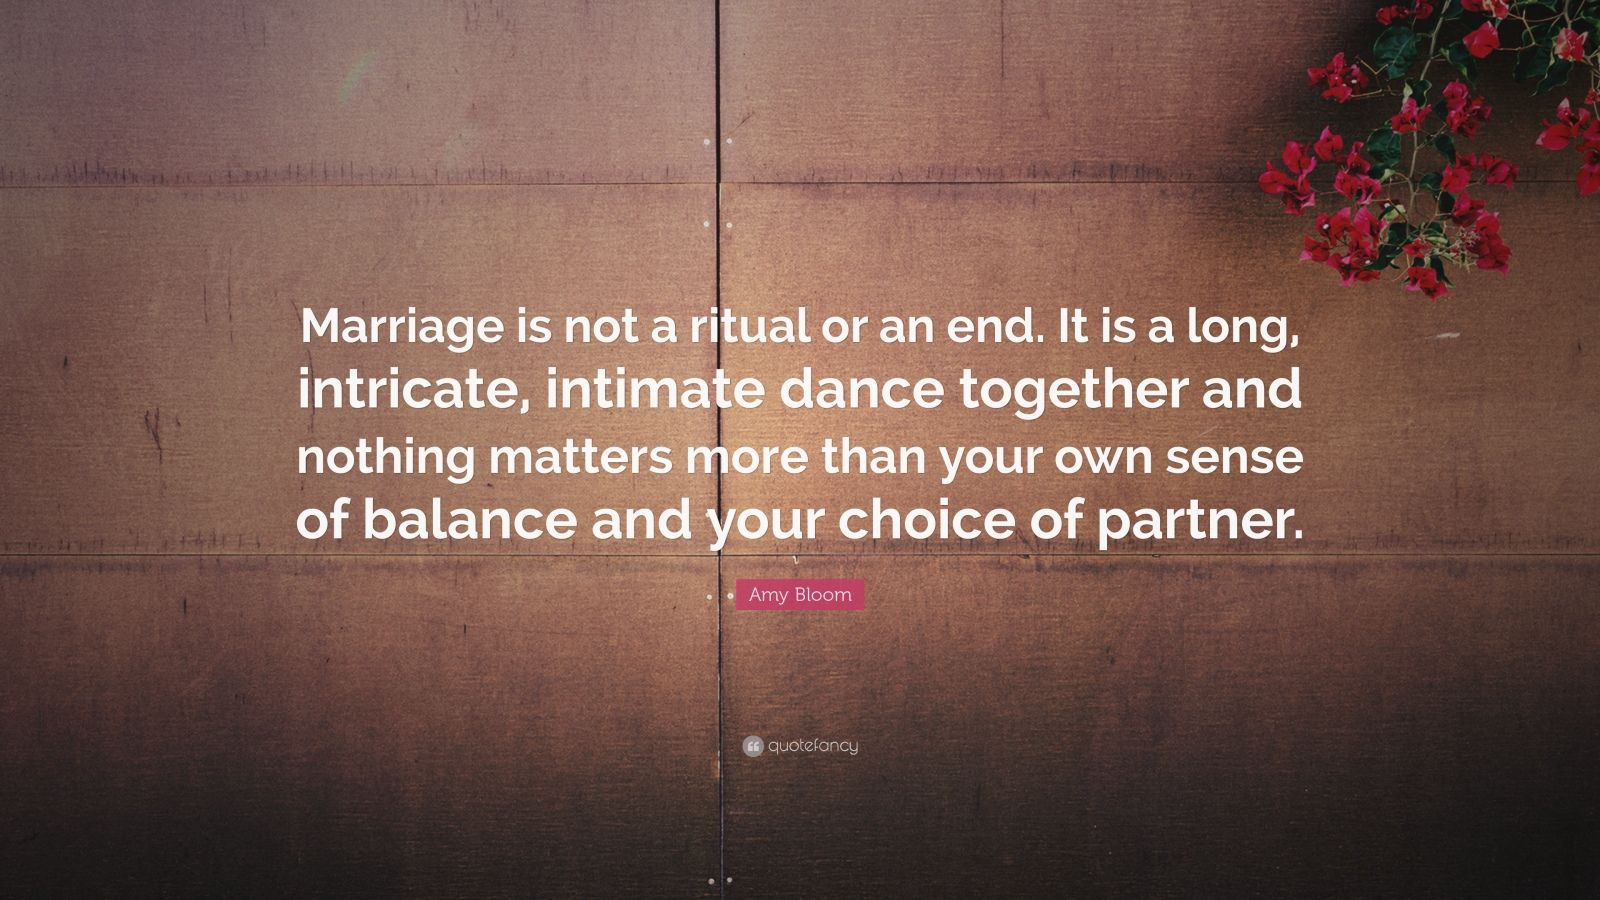 Marriage Ended Quotes
 Marriage Quotes 58 wallpapers Quotefancy